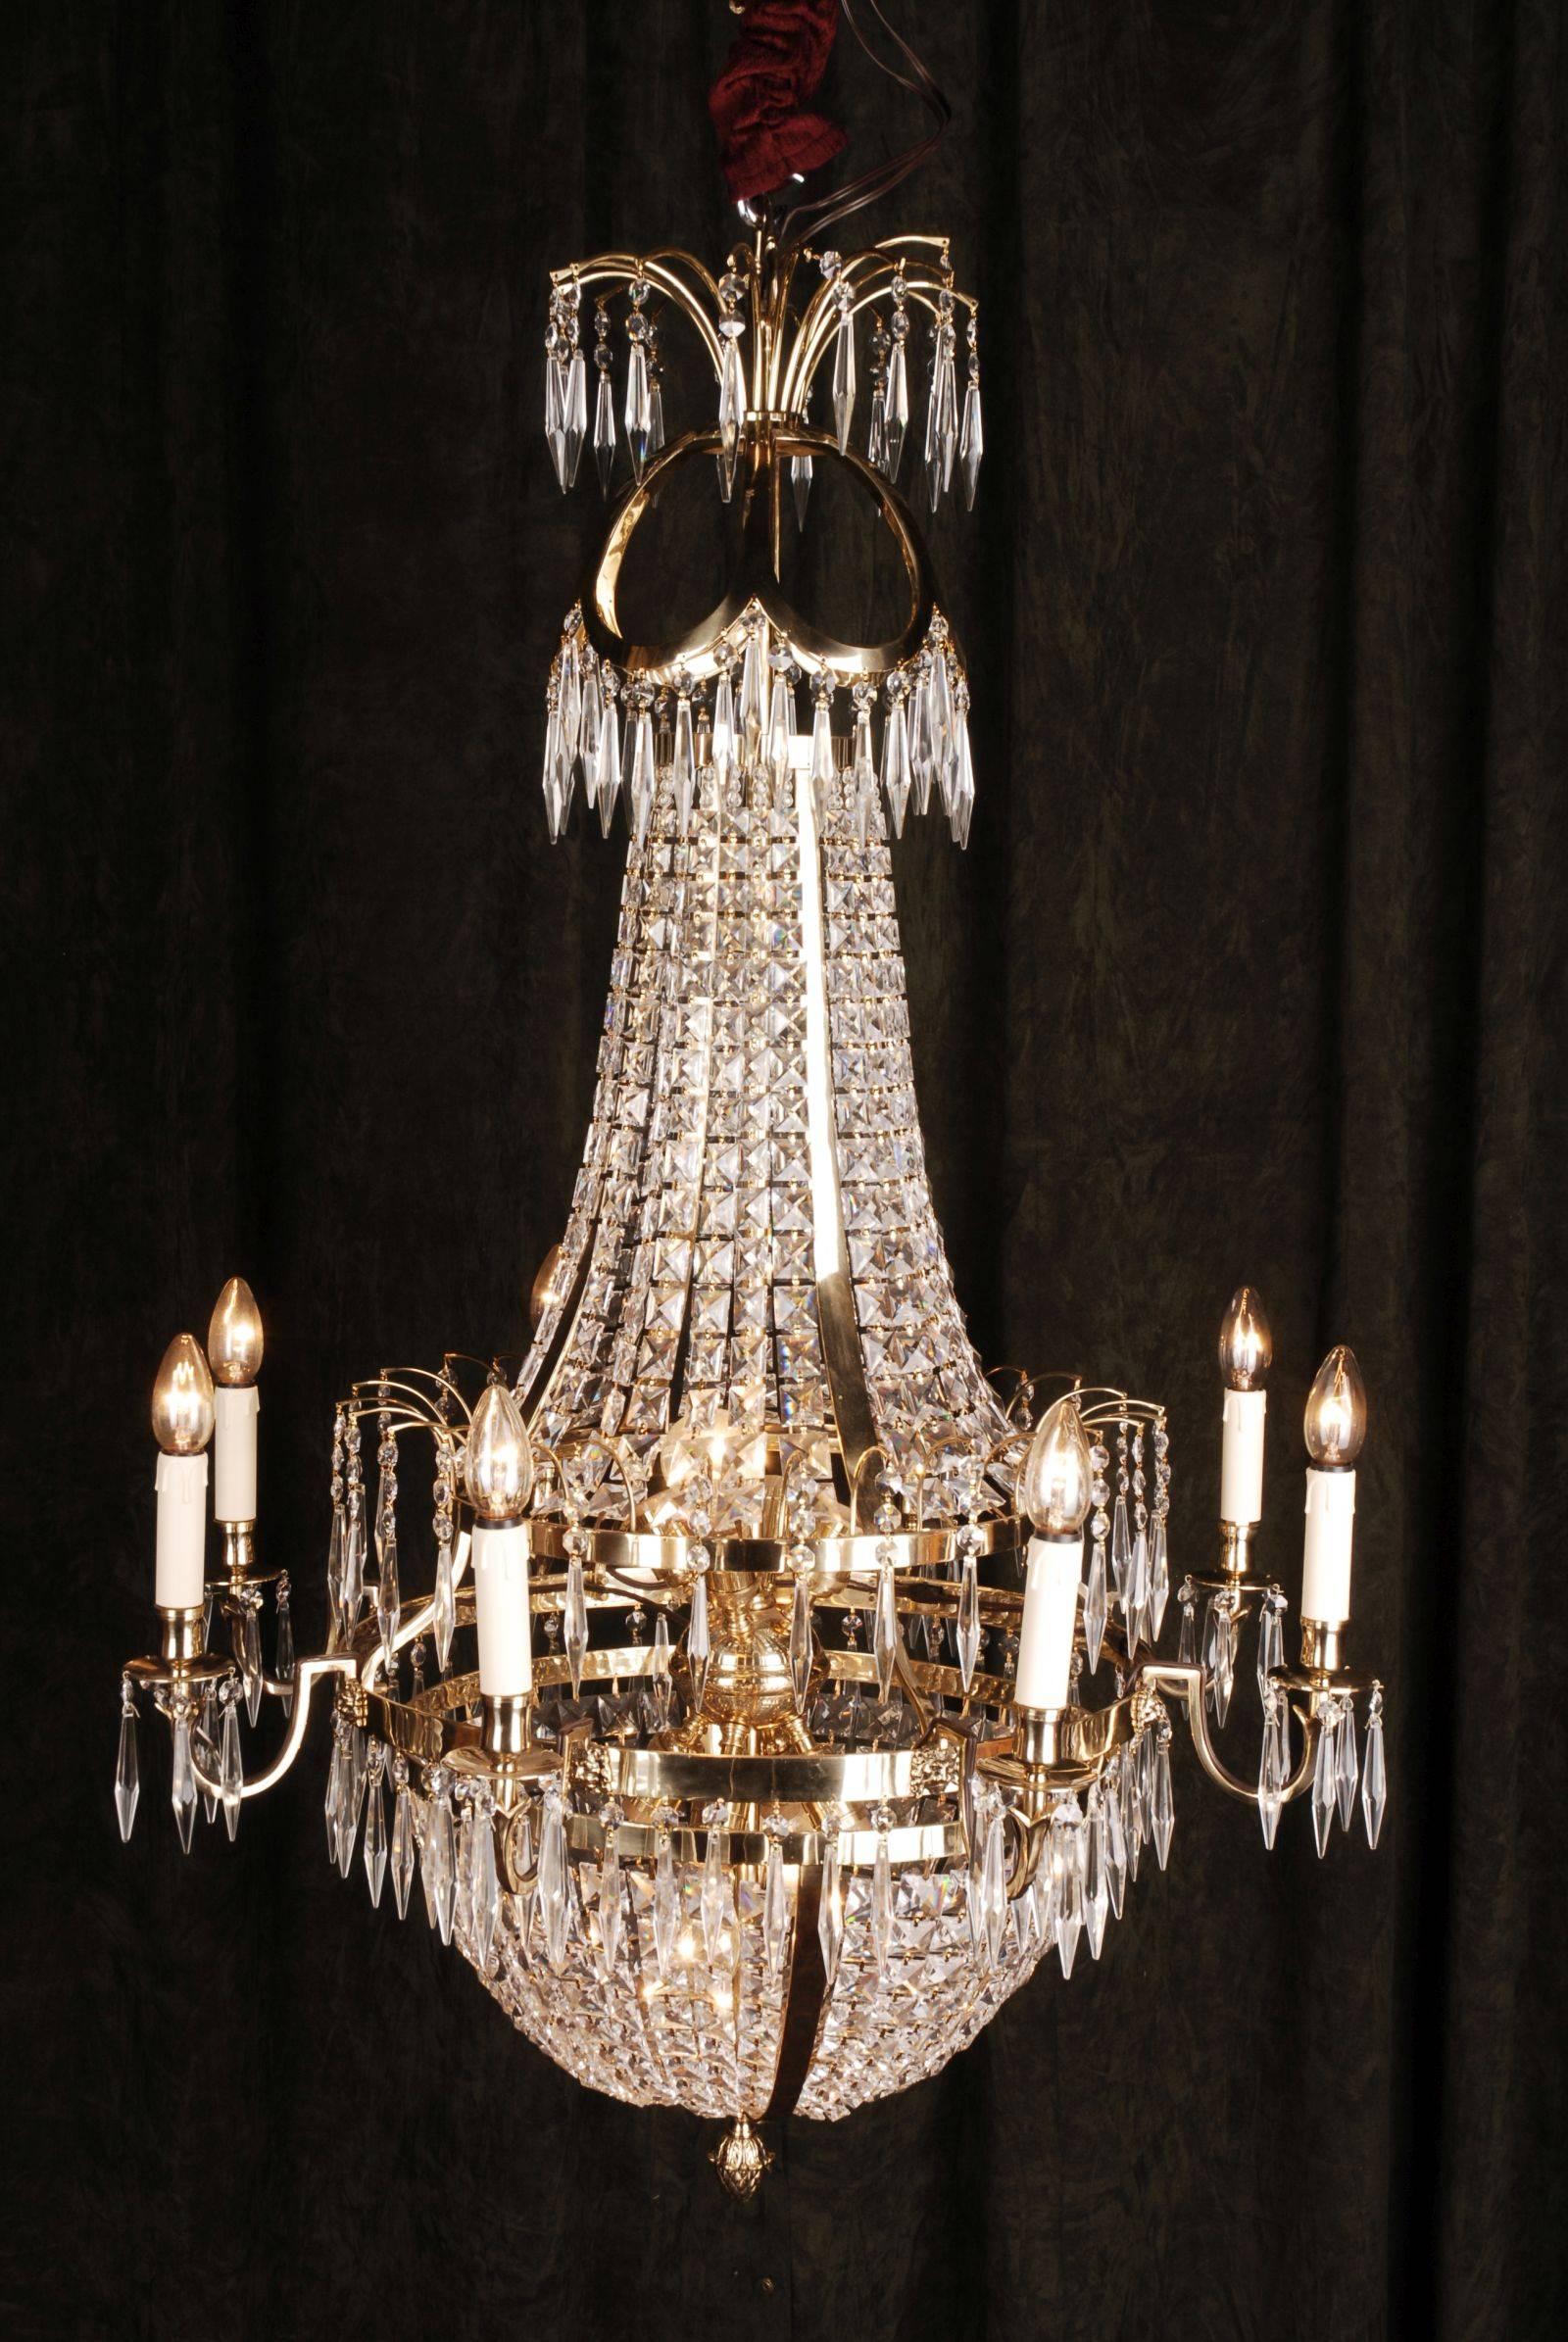 Swedish Empire ceiling candelabra in classicist style.
Polished brass and facett-ground prism hangings.

(F-Ra-82).